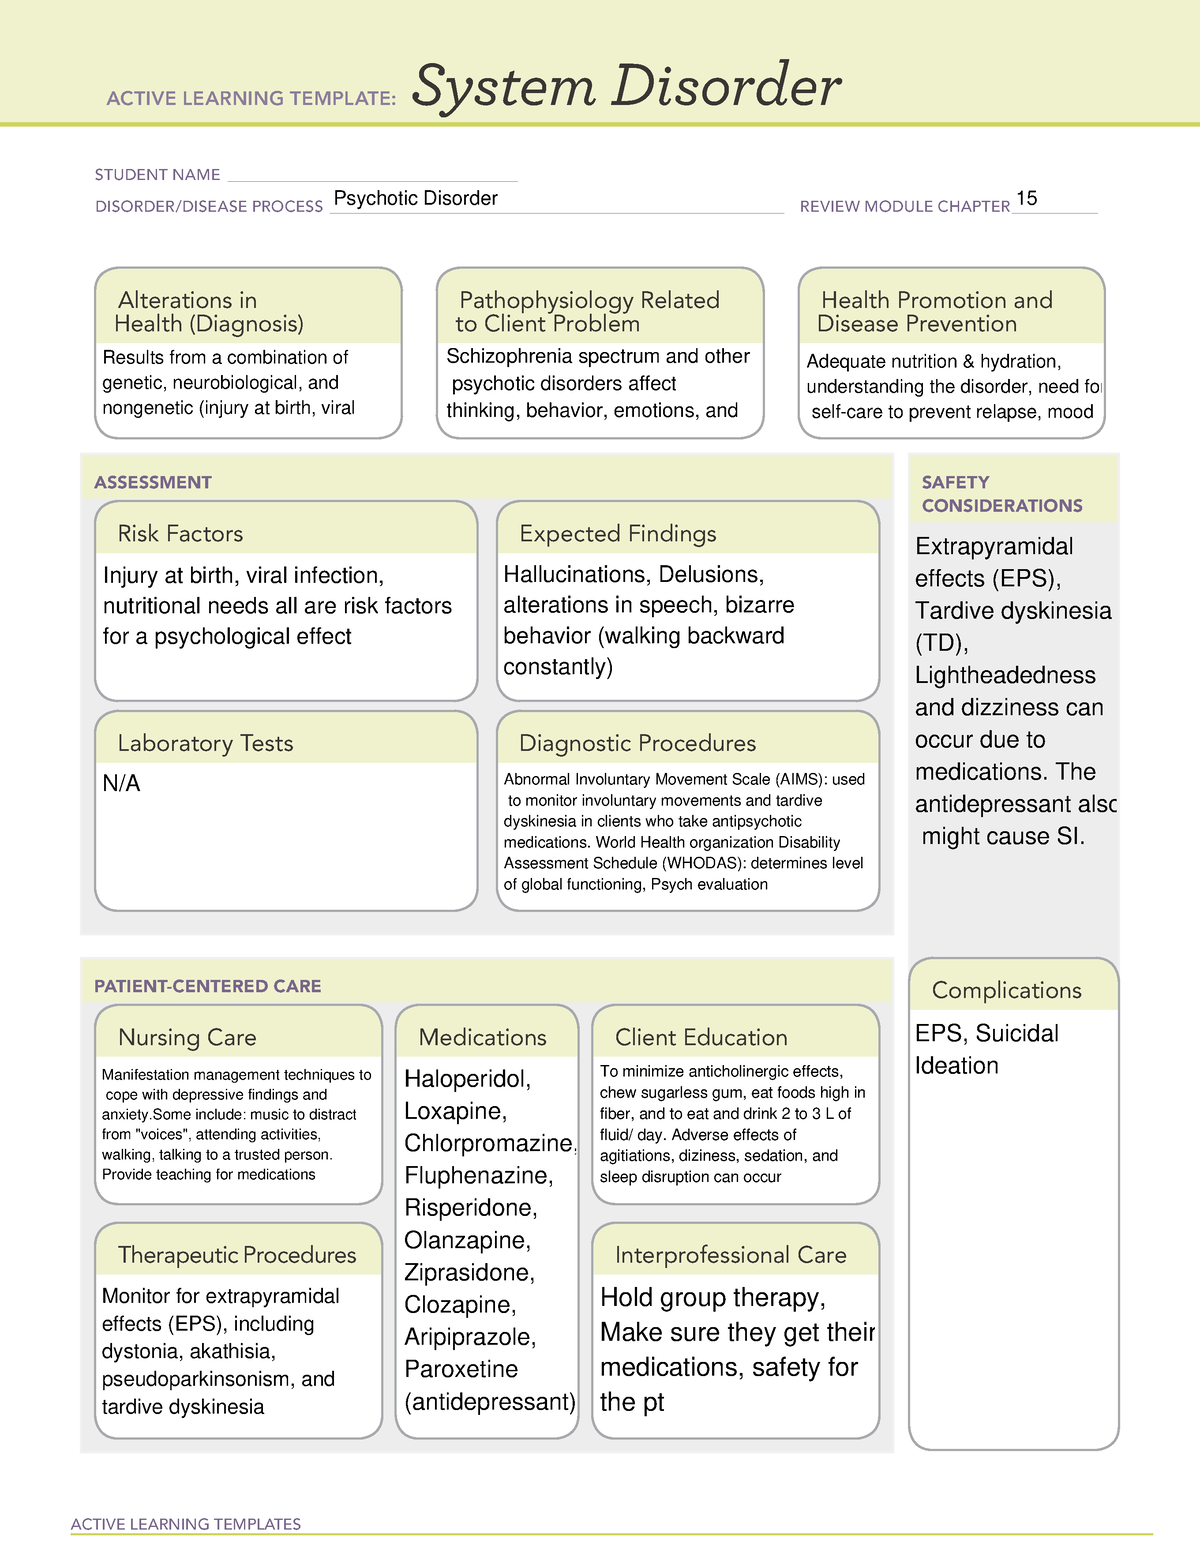 system-disorder-psychotic-disorder-ati-a-active-learning-templates-system-disorder-student